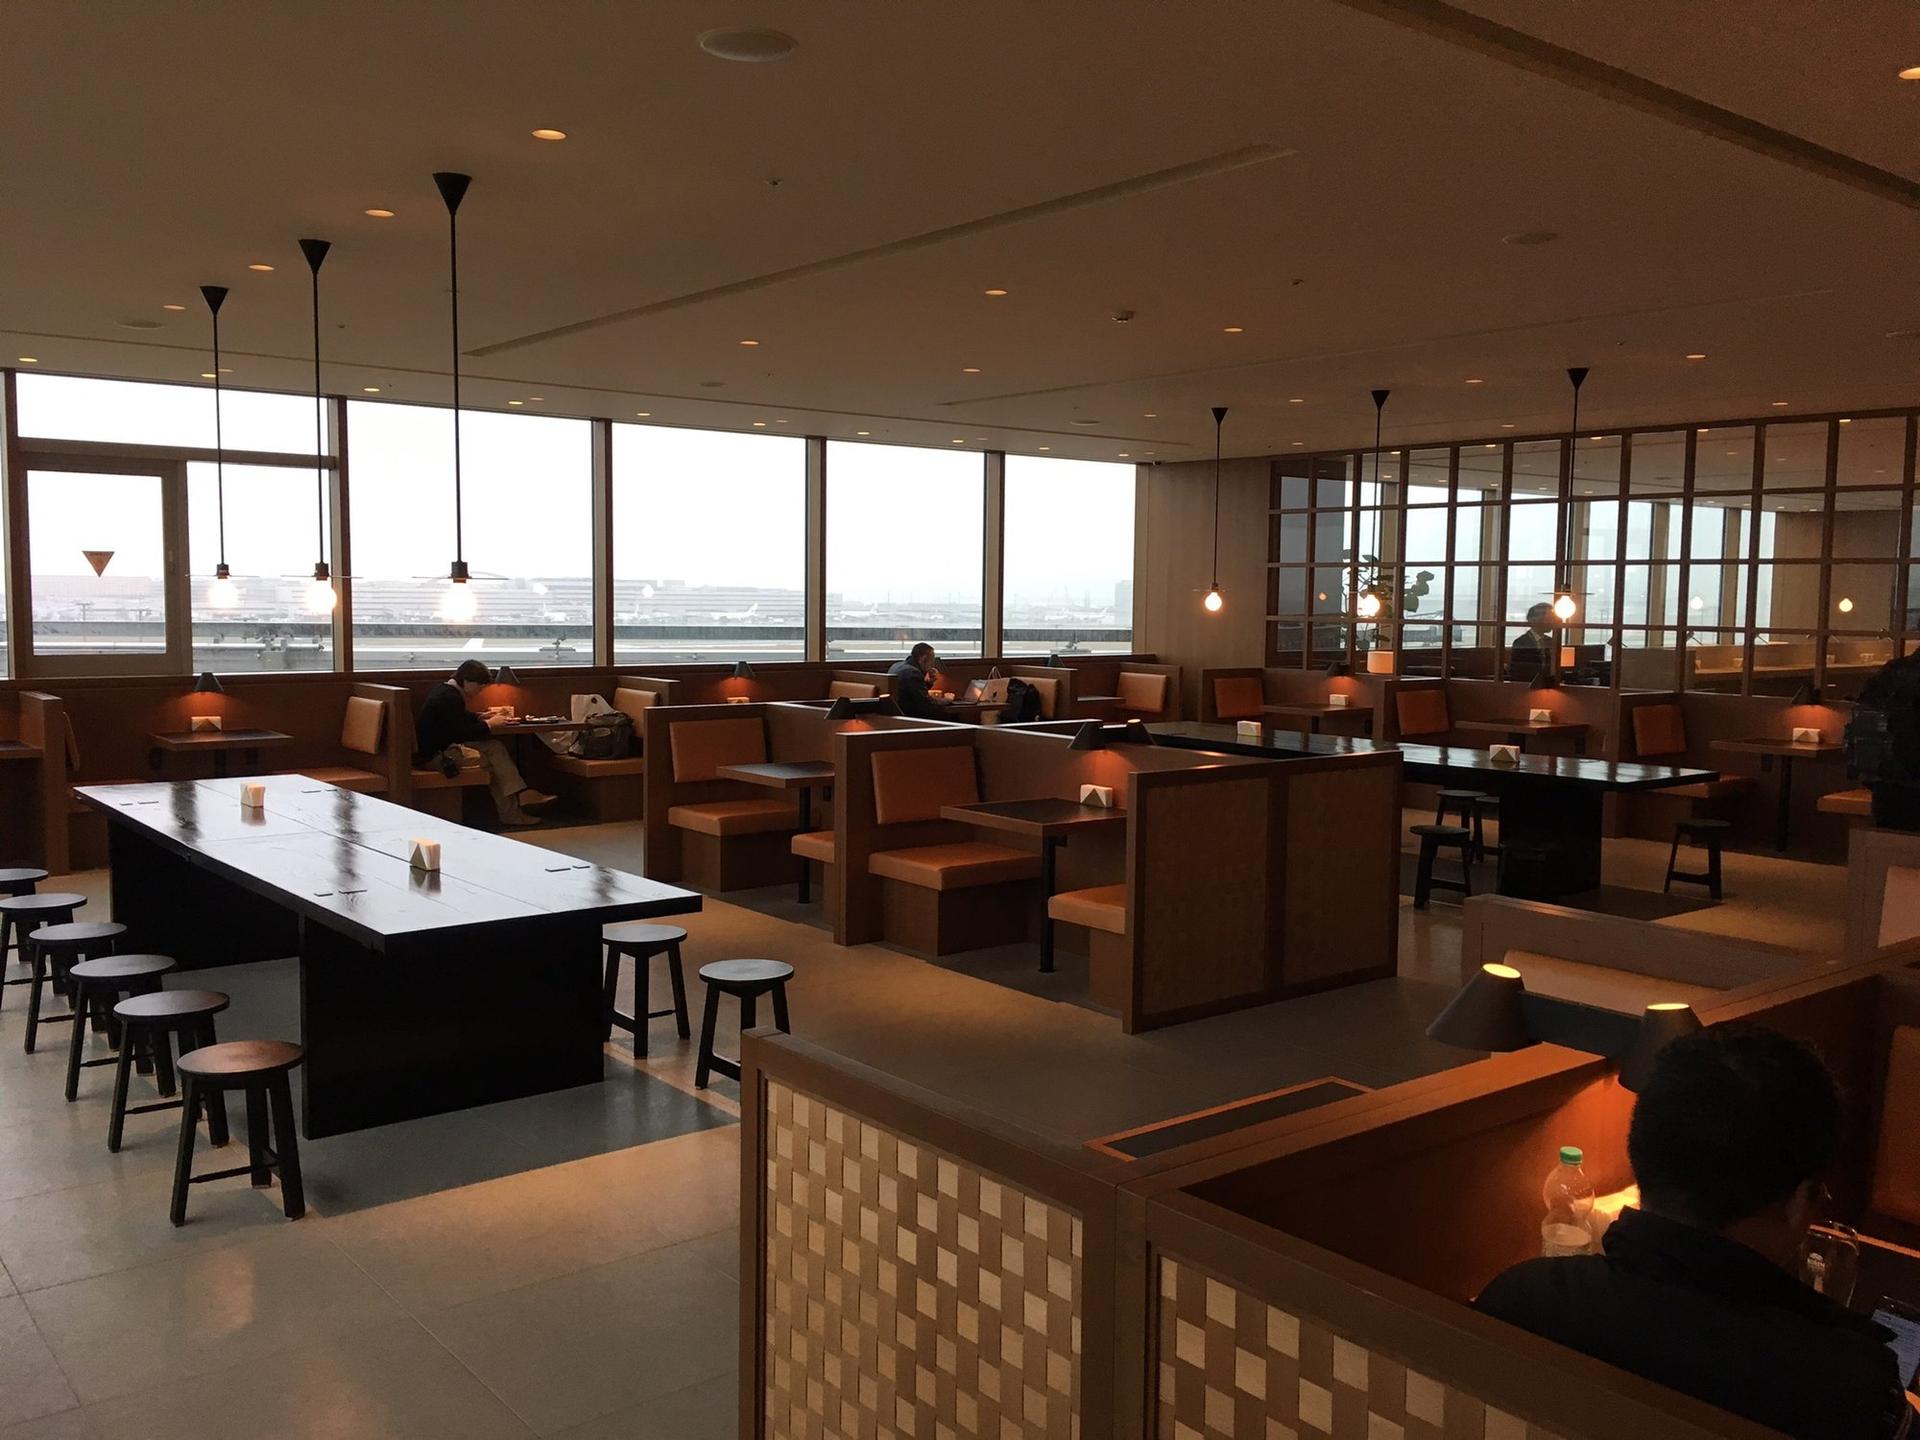 Cathay Pacific Lounge image 16 of 49